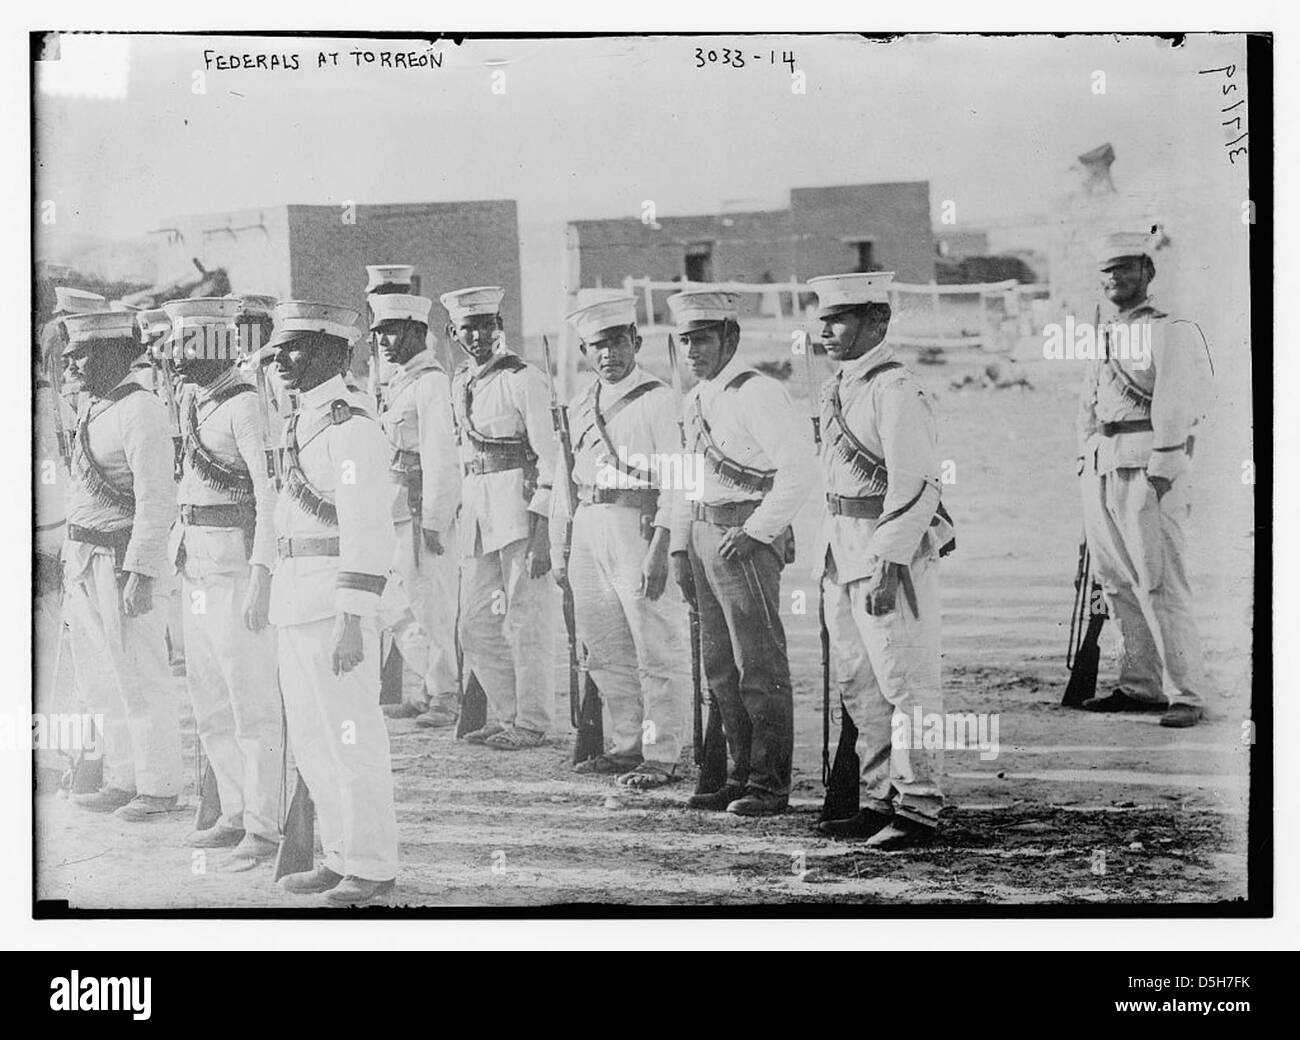 Federals at Torreon (LOC) Stock Photo